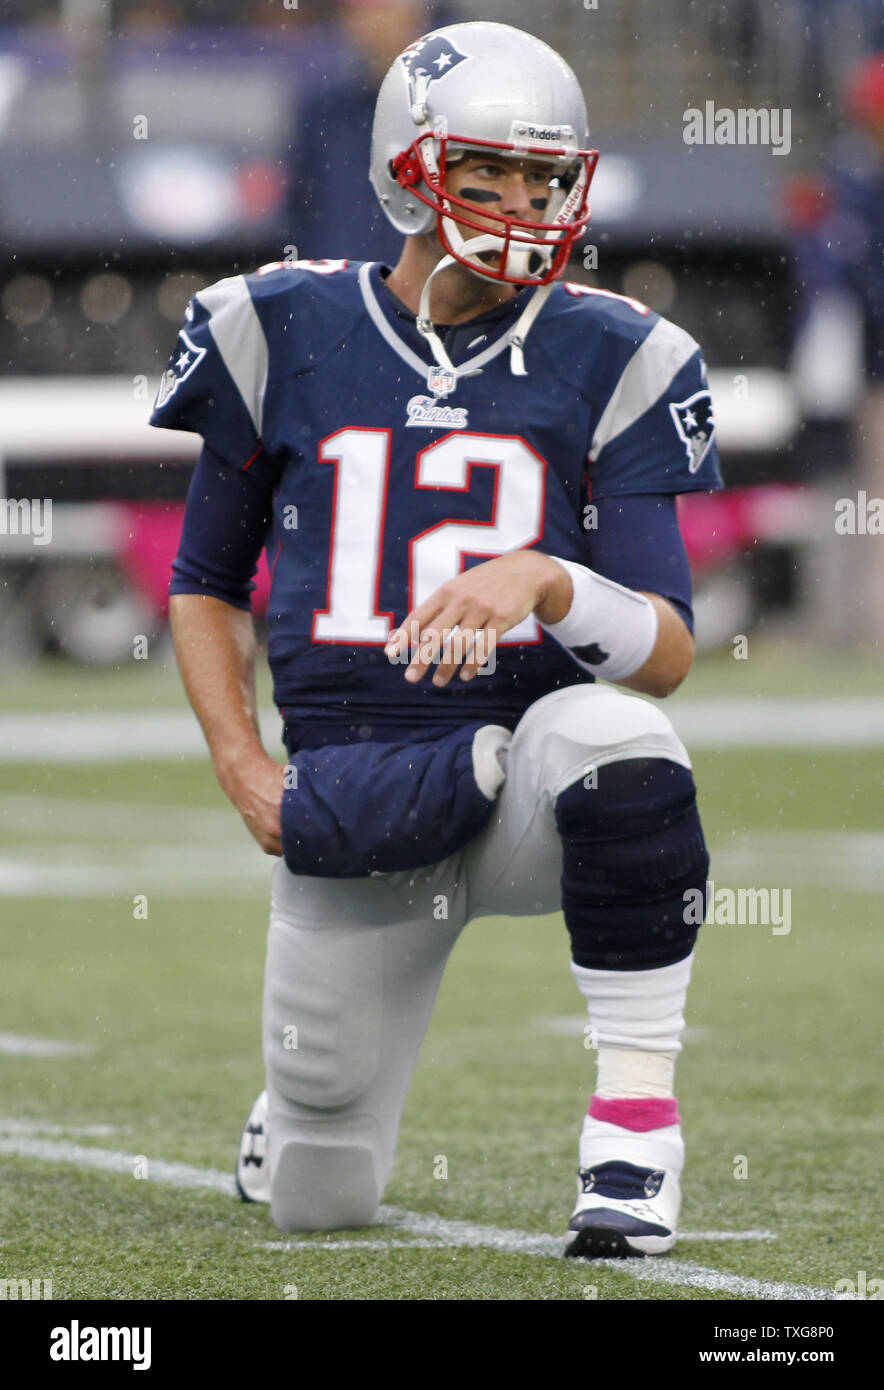 New England Patriots quarterback Tom Brady stretches with his team before the game against the Denver Broncos at Gillette Stadium in Foxboro, Massachusetts on October 7, 2012.  UPI/Matthew Healey Stock Photo